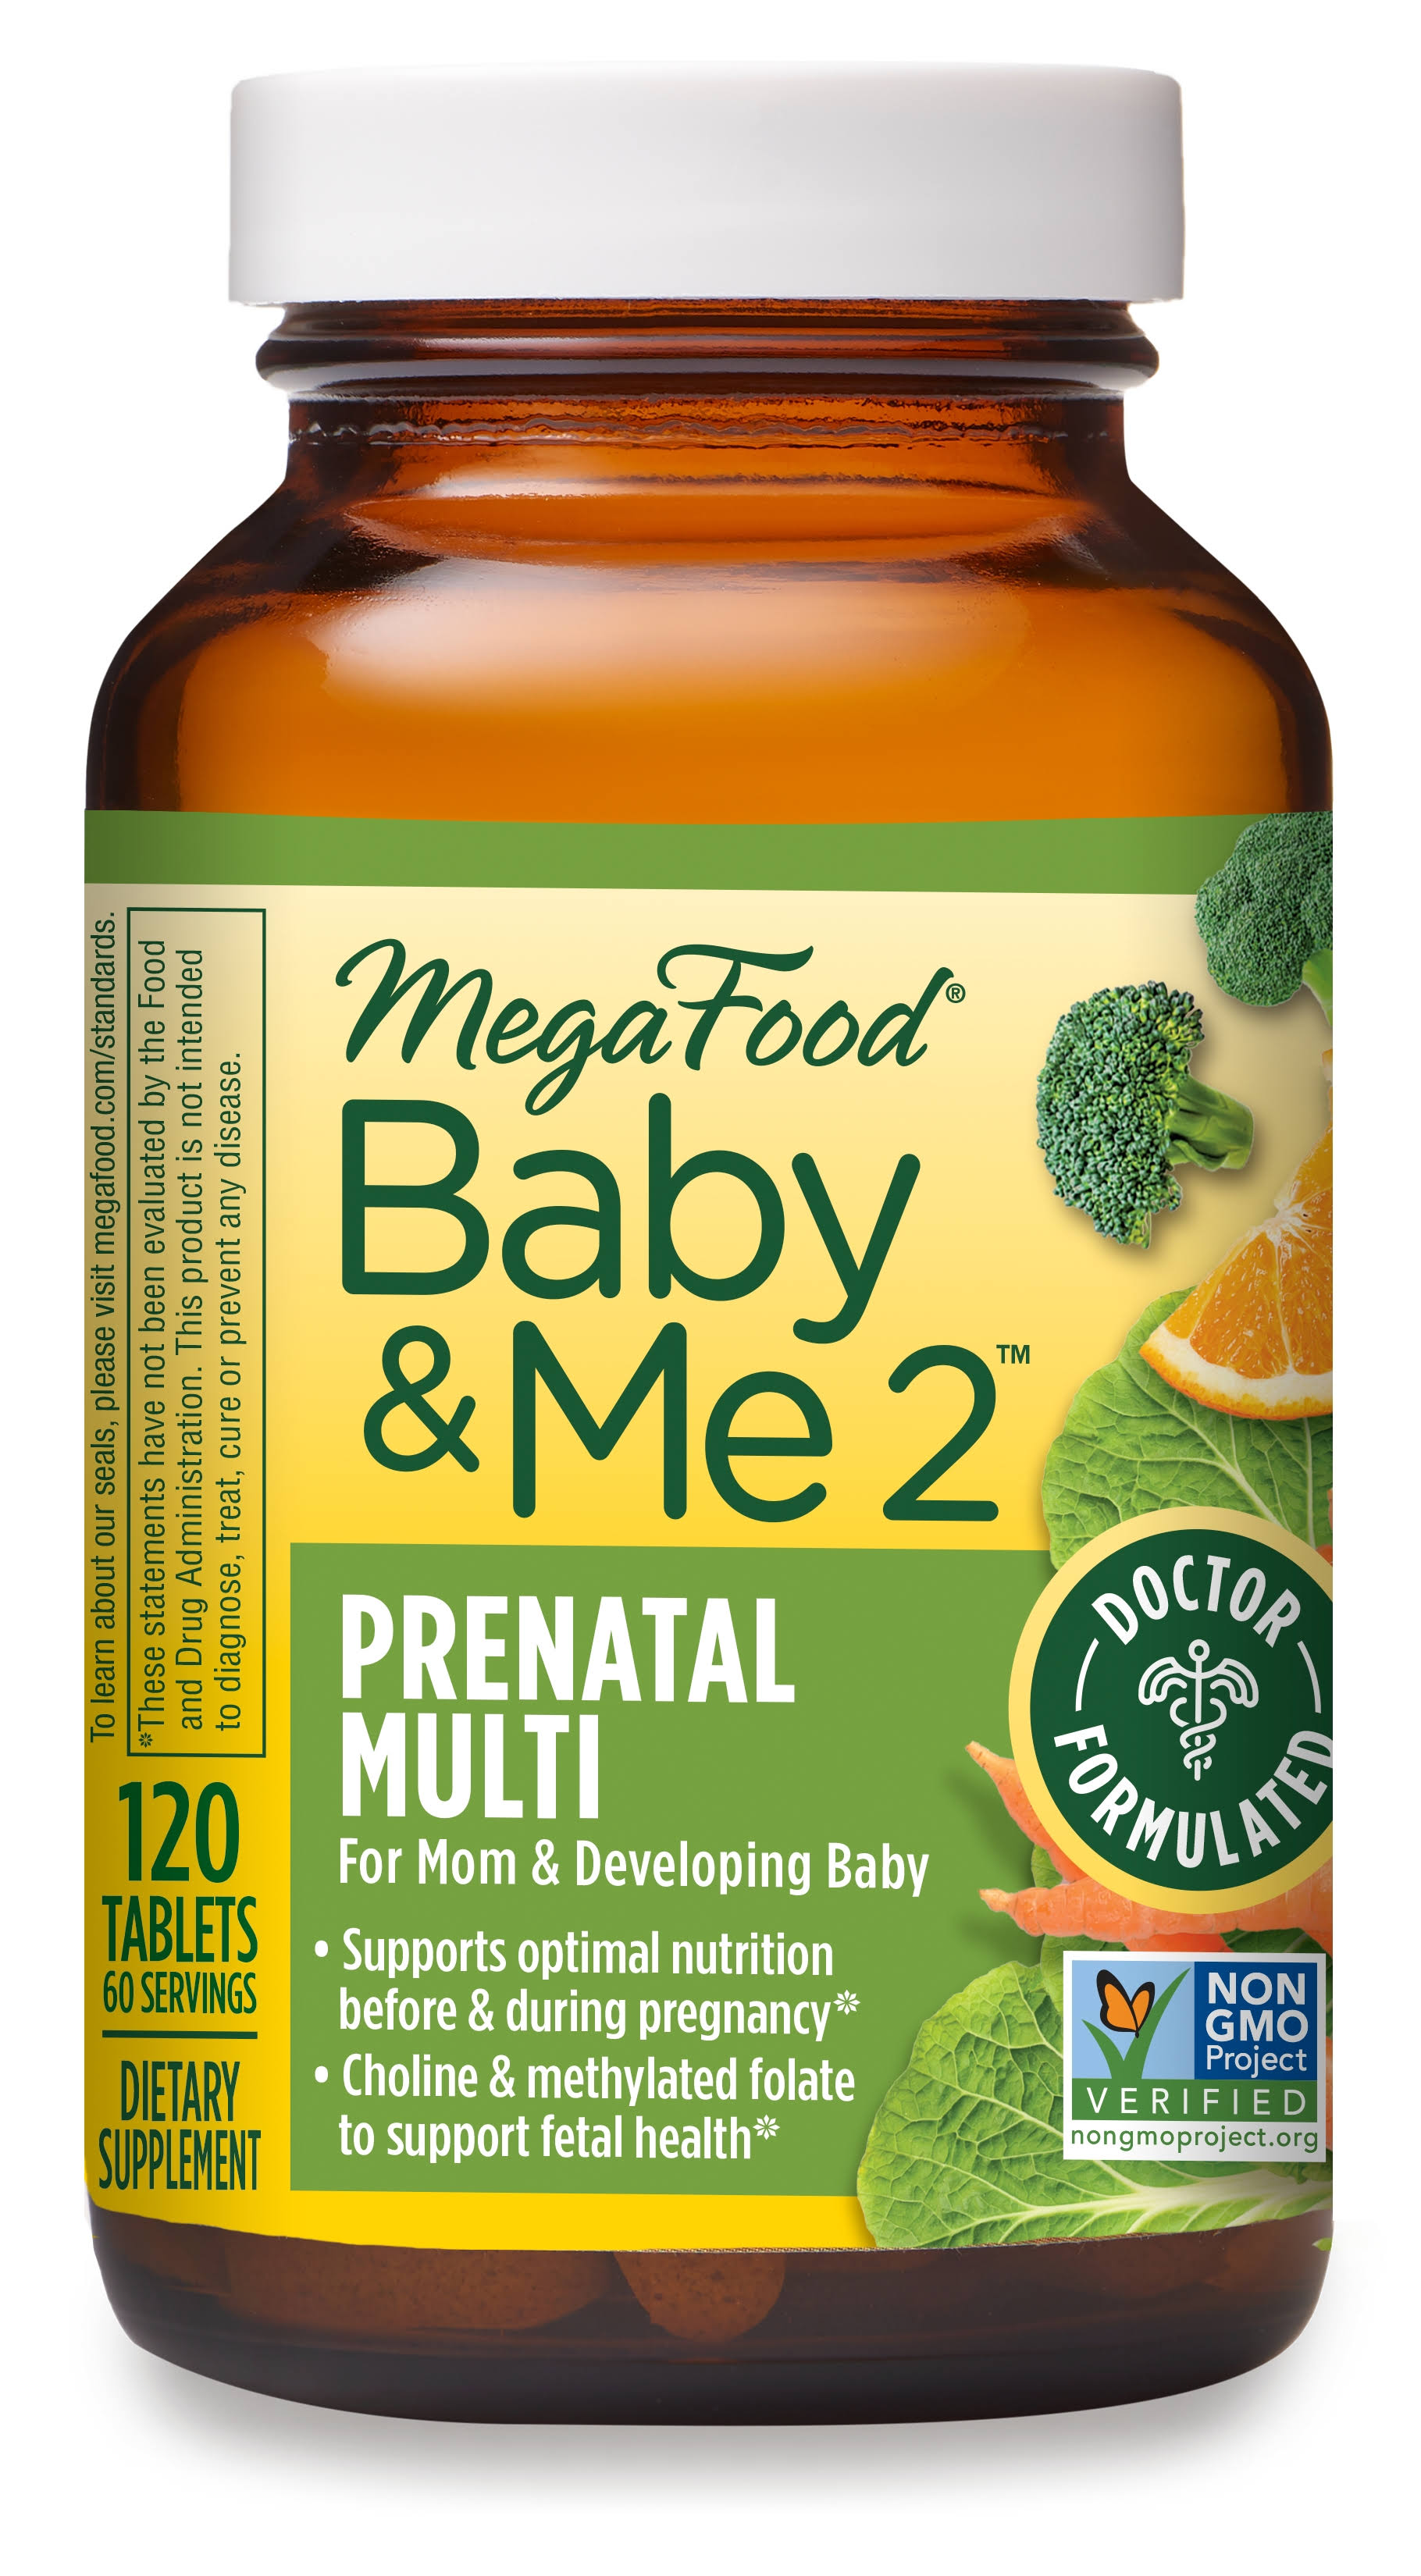 Megafood Baby & Me 2 Dietary Supplement - 120 Tablets